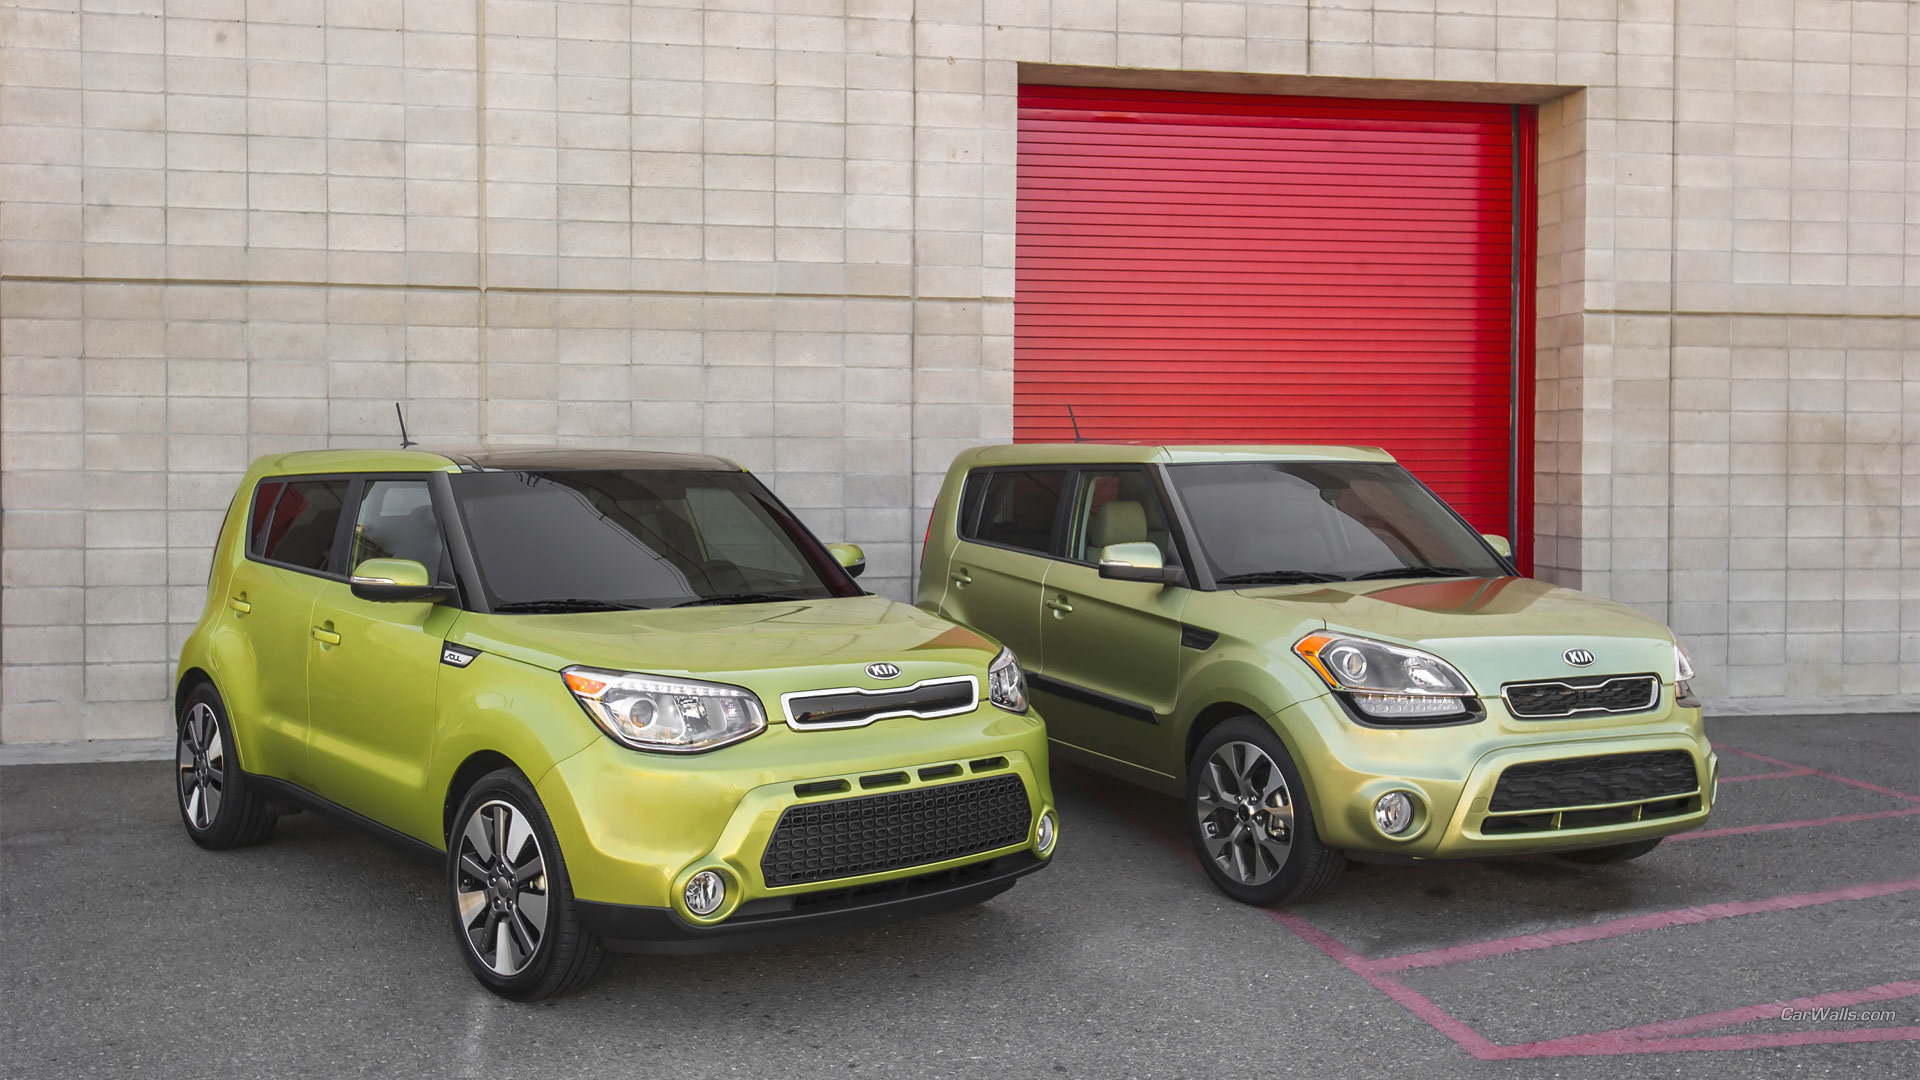 Best Kia Soul wallpaper ID:131359 for High Resolution hd 1080p computer